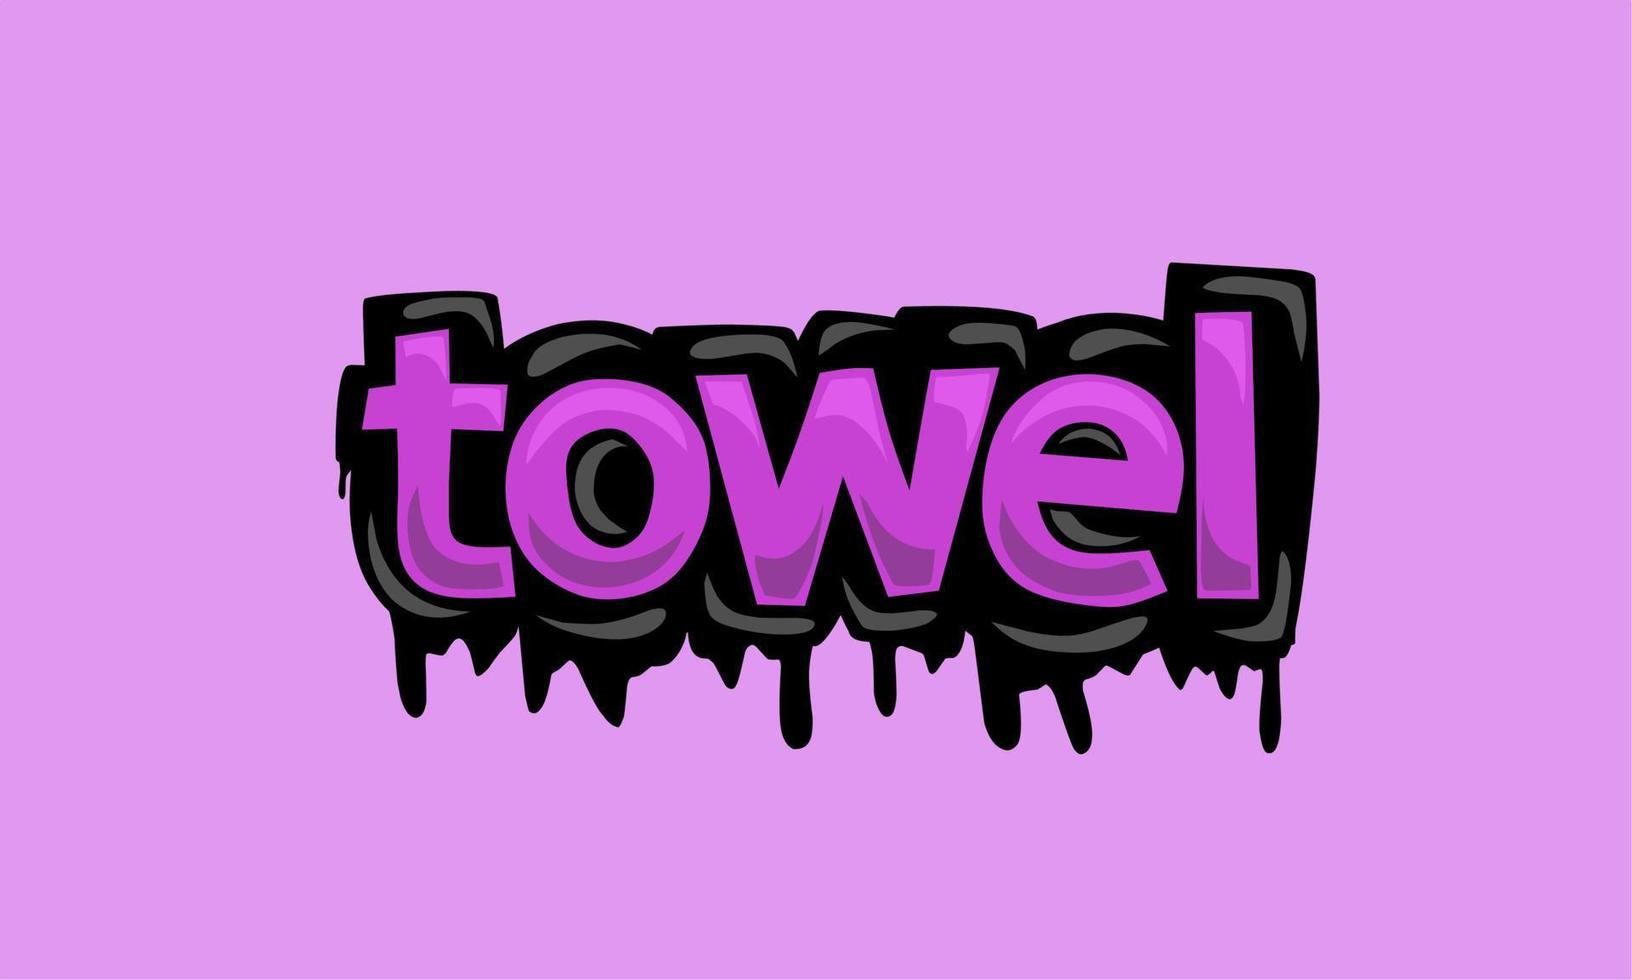 TOWEL writing vector design on pink background